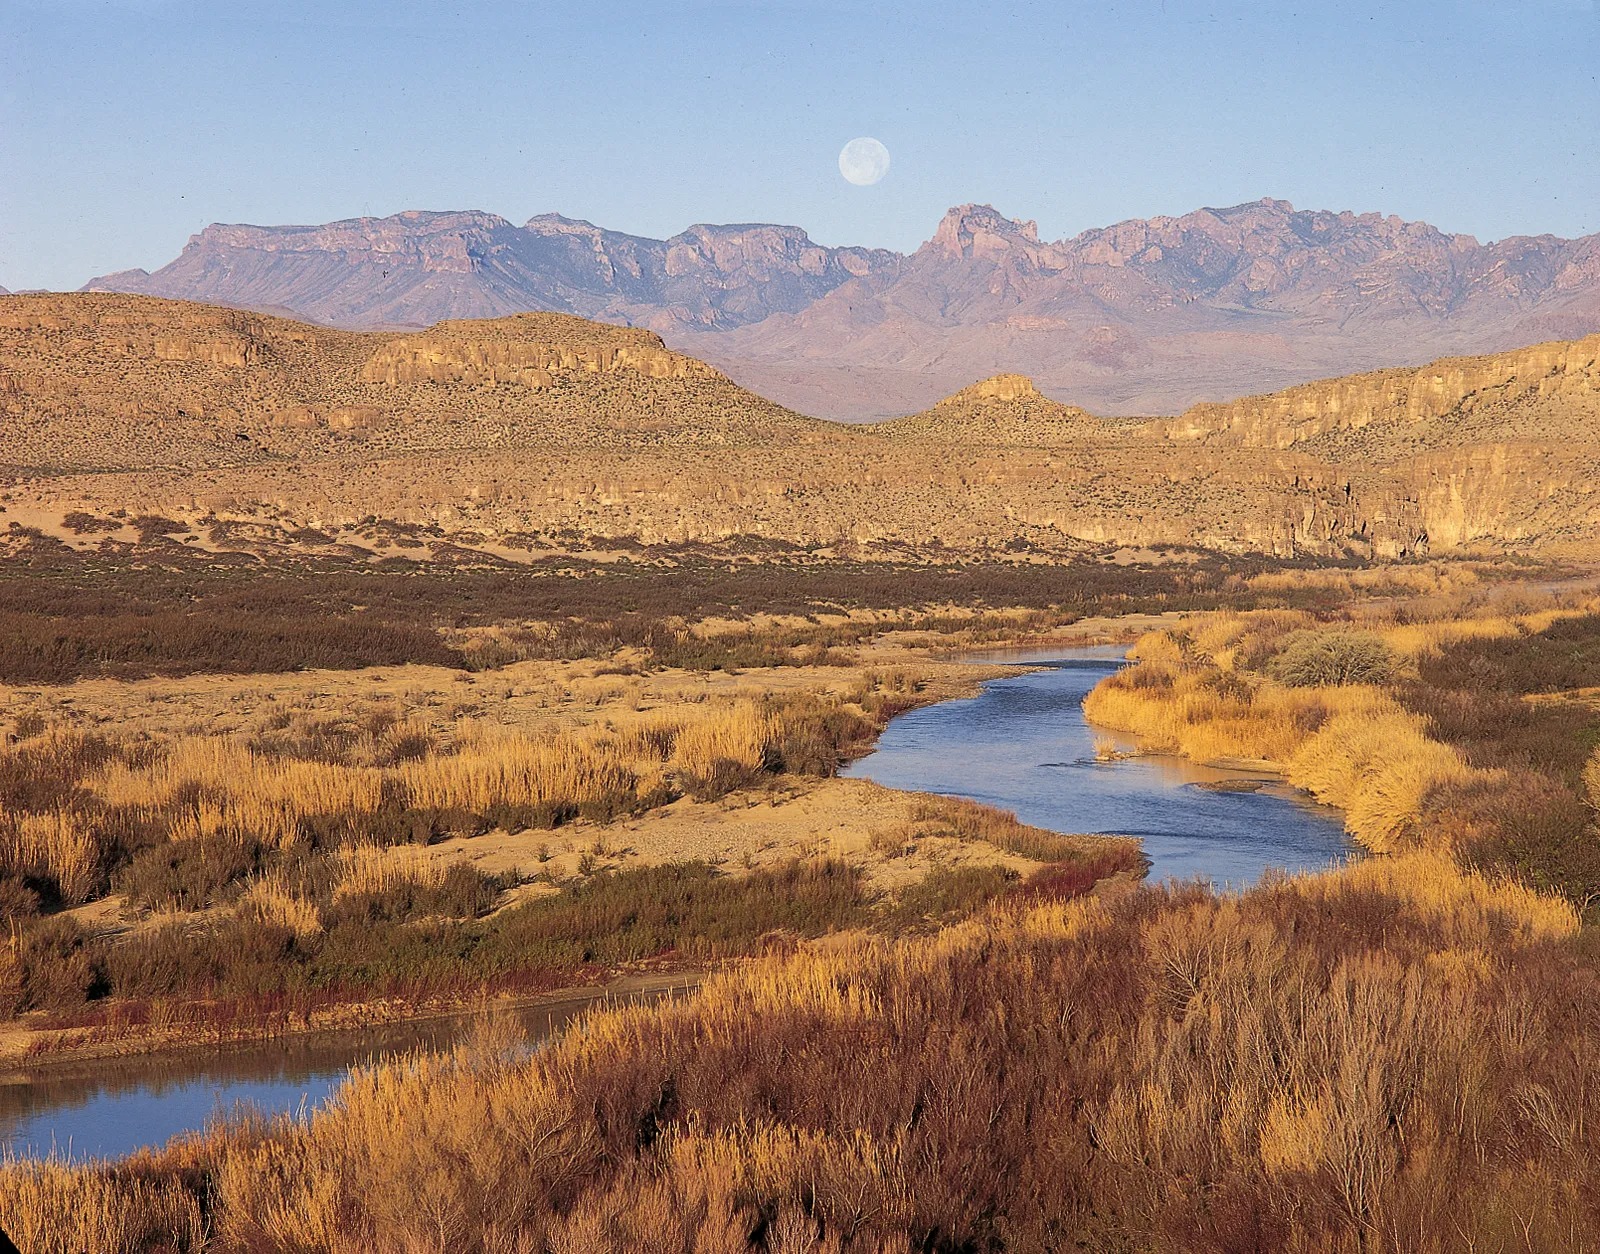 It's Time to Take Geography Test — Can You Get 18 on This 'Round World Quiz? Rio Grande